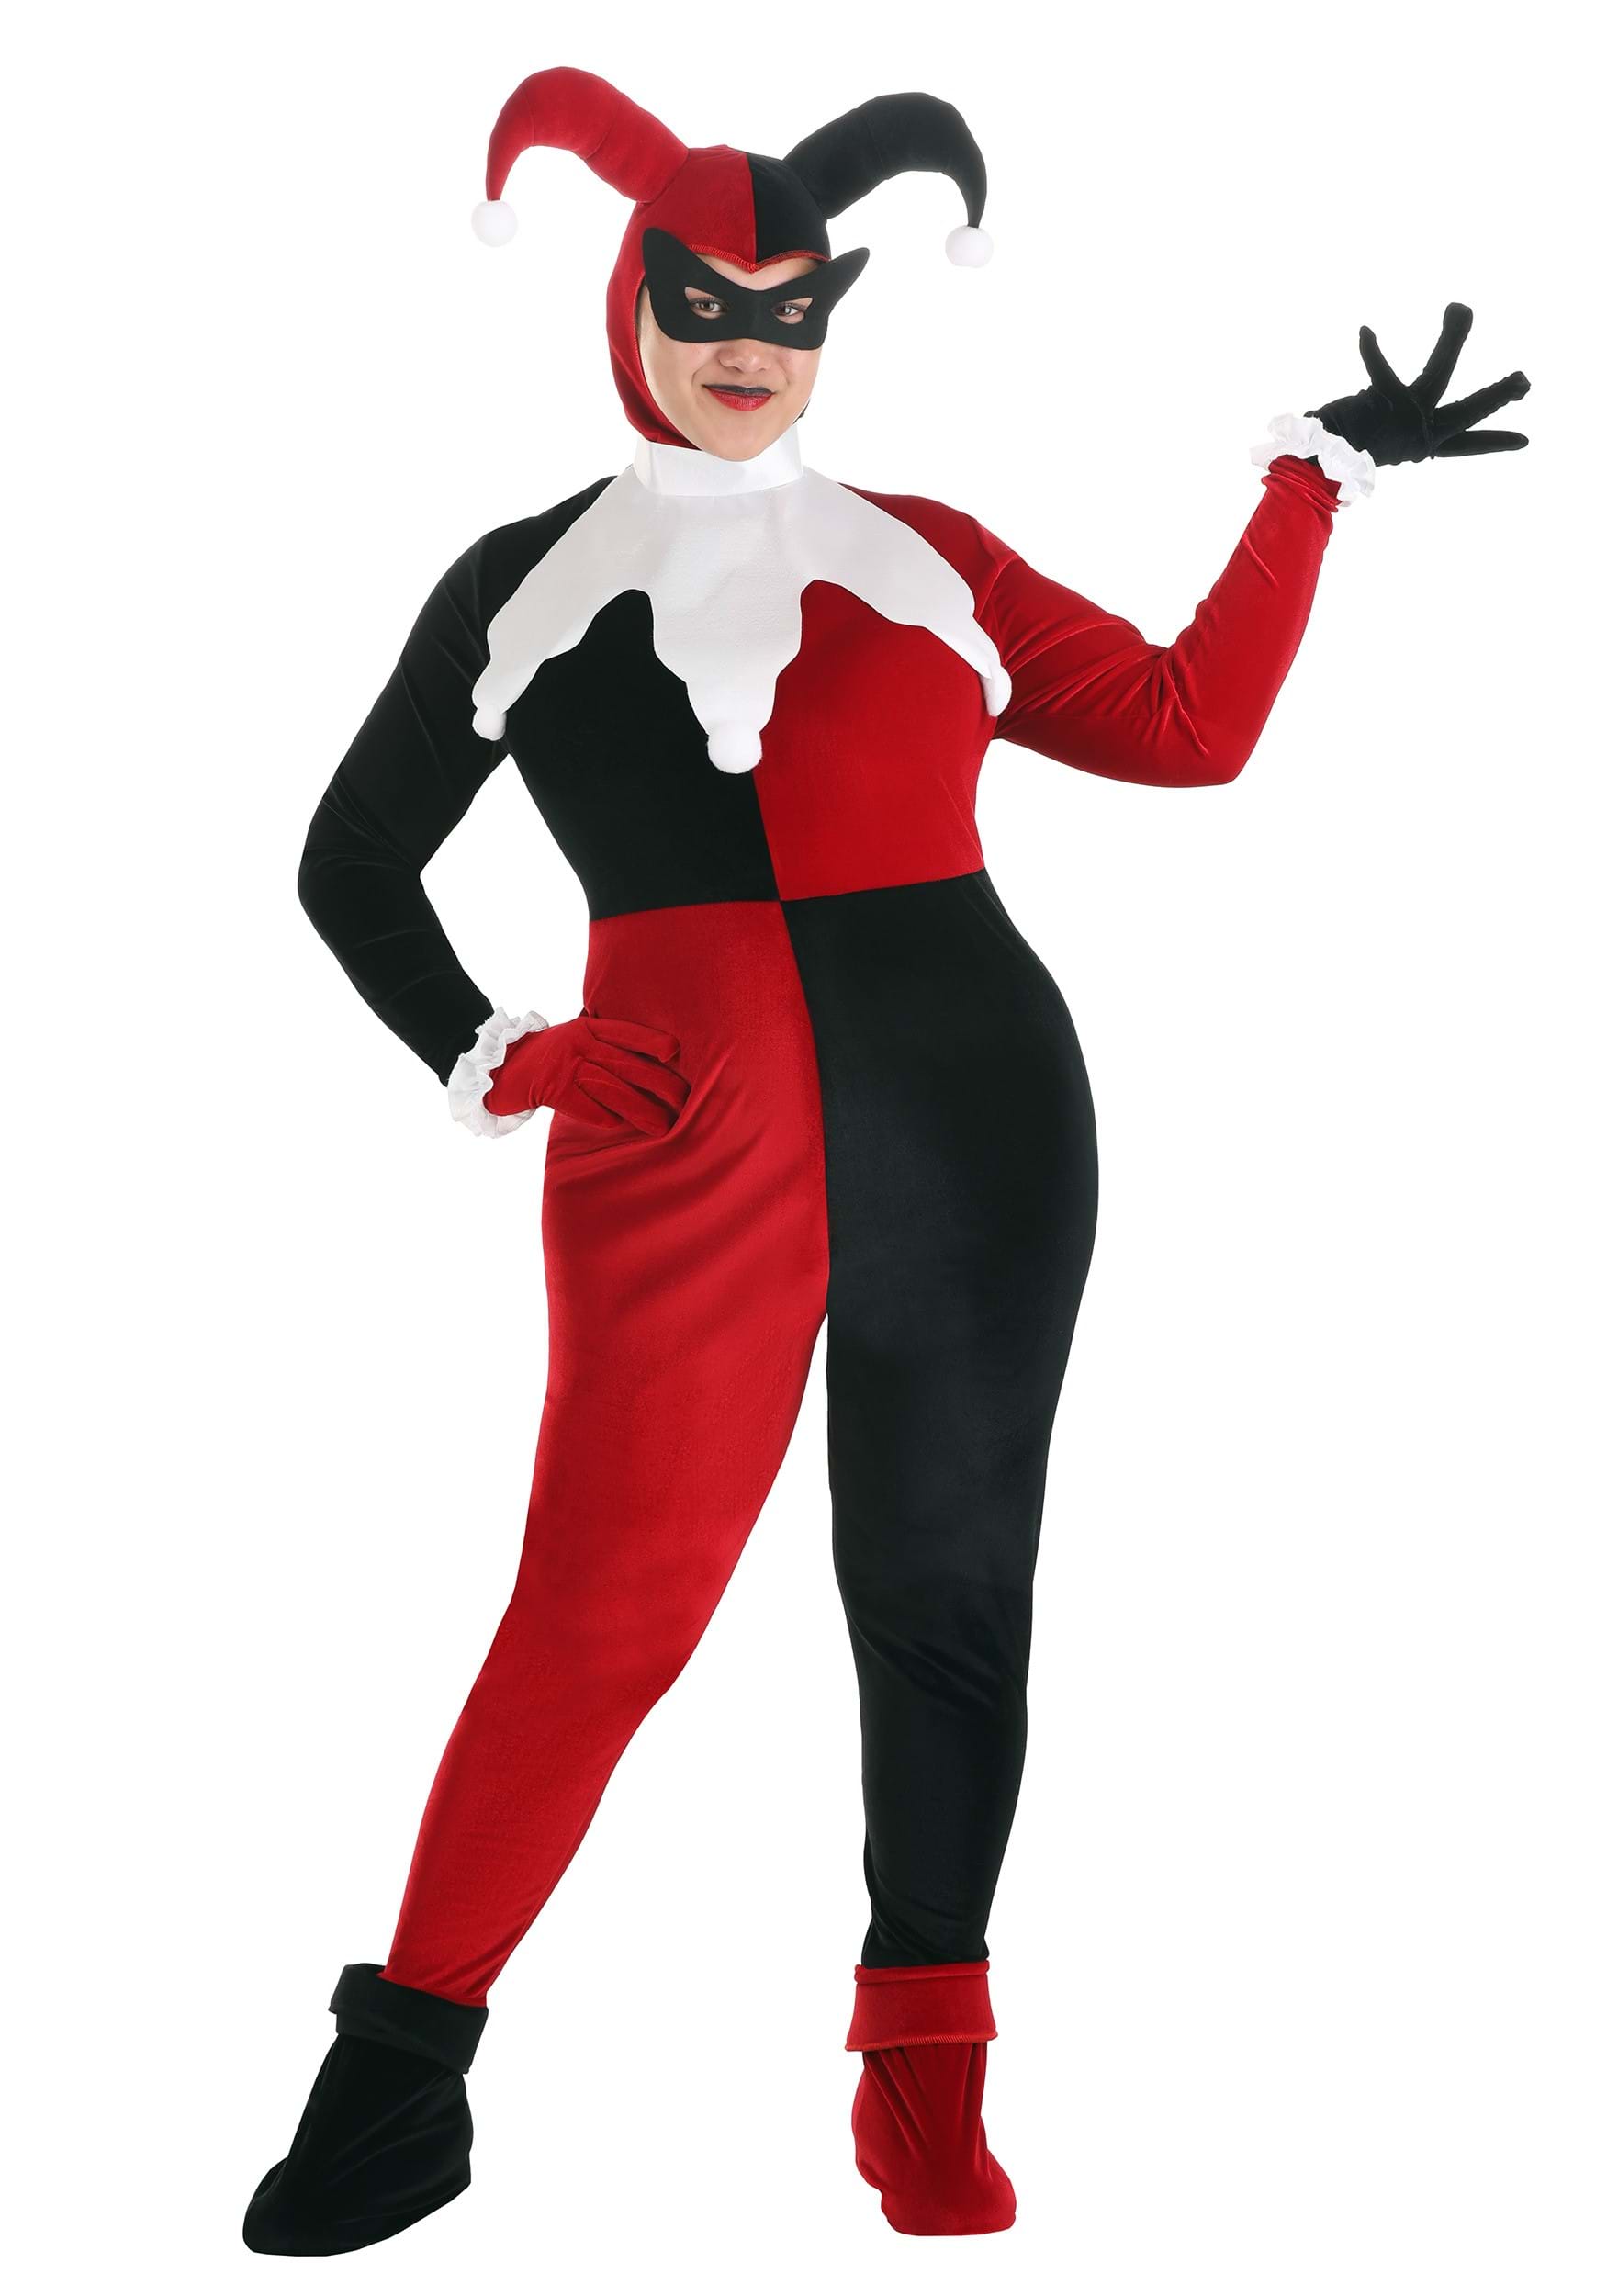 Photos - Fancy Dress Deluxe FUN Costumes  Plus Size Harley Quinn Costume Black/Red 